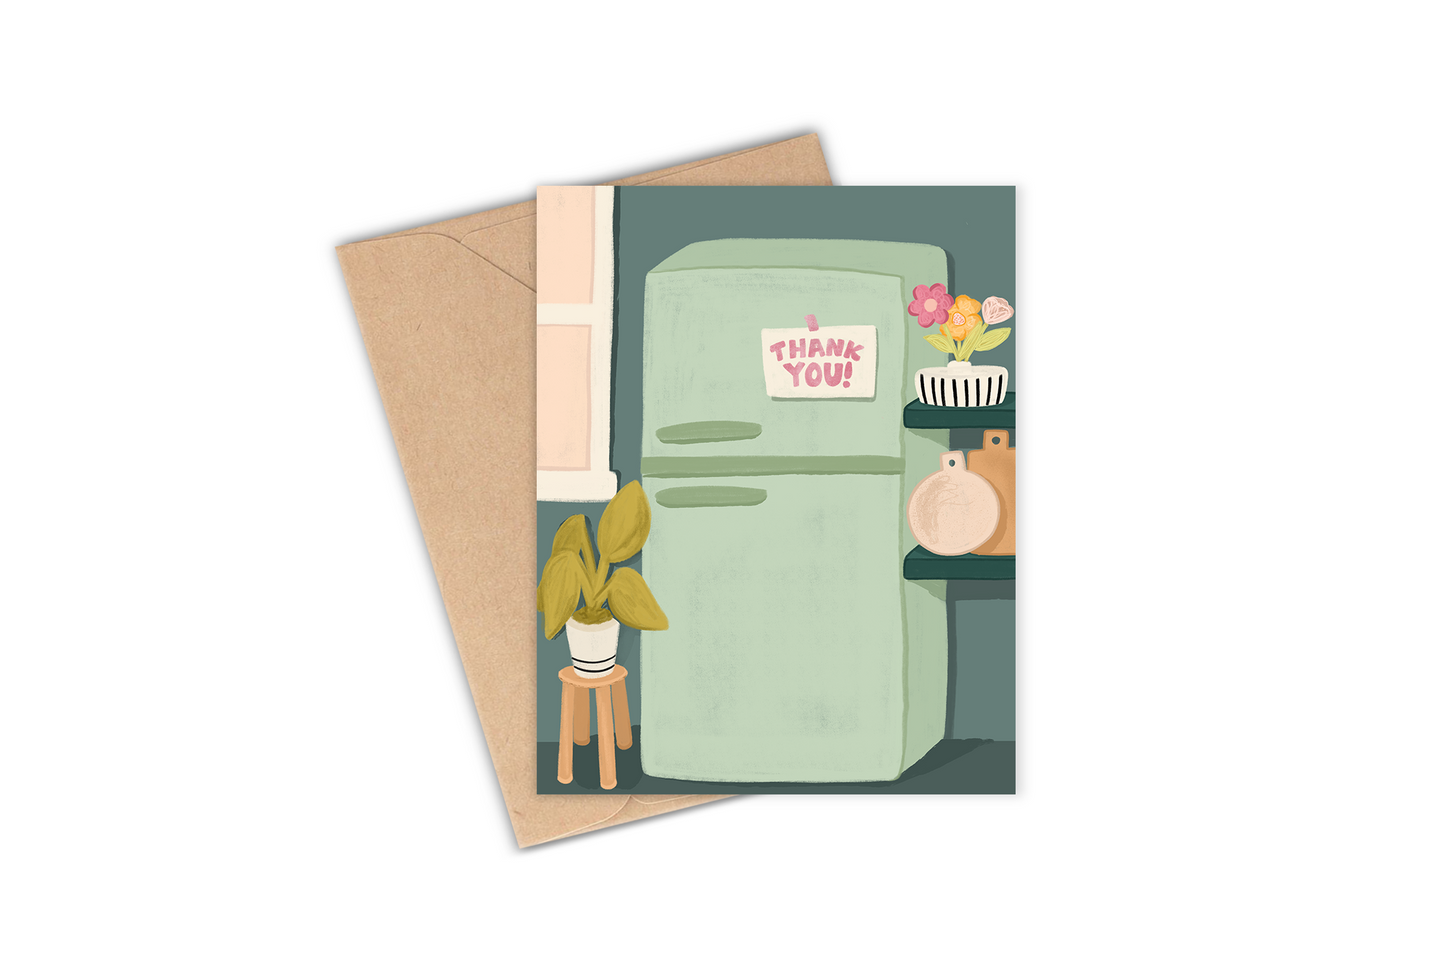 This greeting card is the perfect thank you card for any occasion - great to give after a birthday party or any other event.  Details: Hand-illustrated drawing of a vintage/retro looking refrigerator with the phrase "Thank you" with a cute and quaint kitchen scene featuring plants, cutting boards, and more.